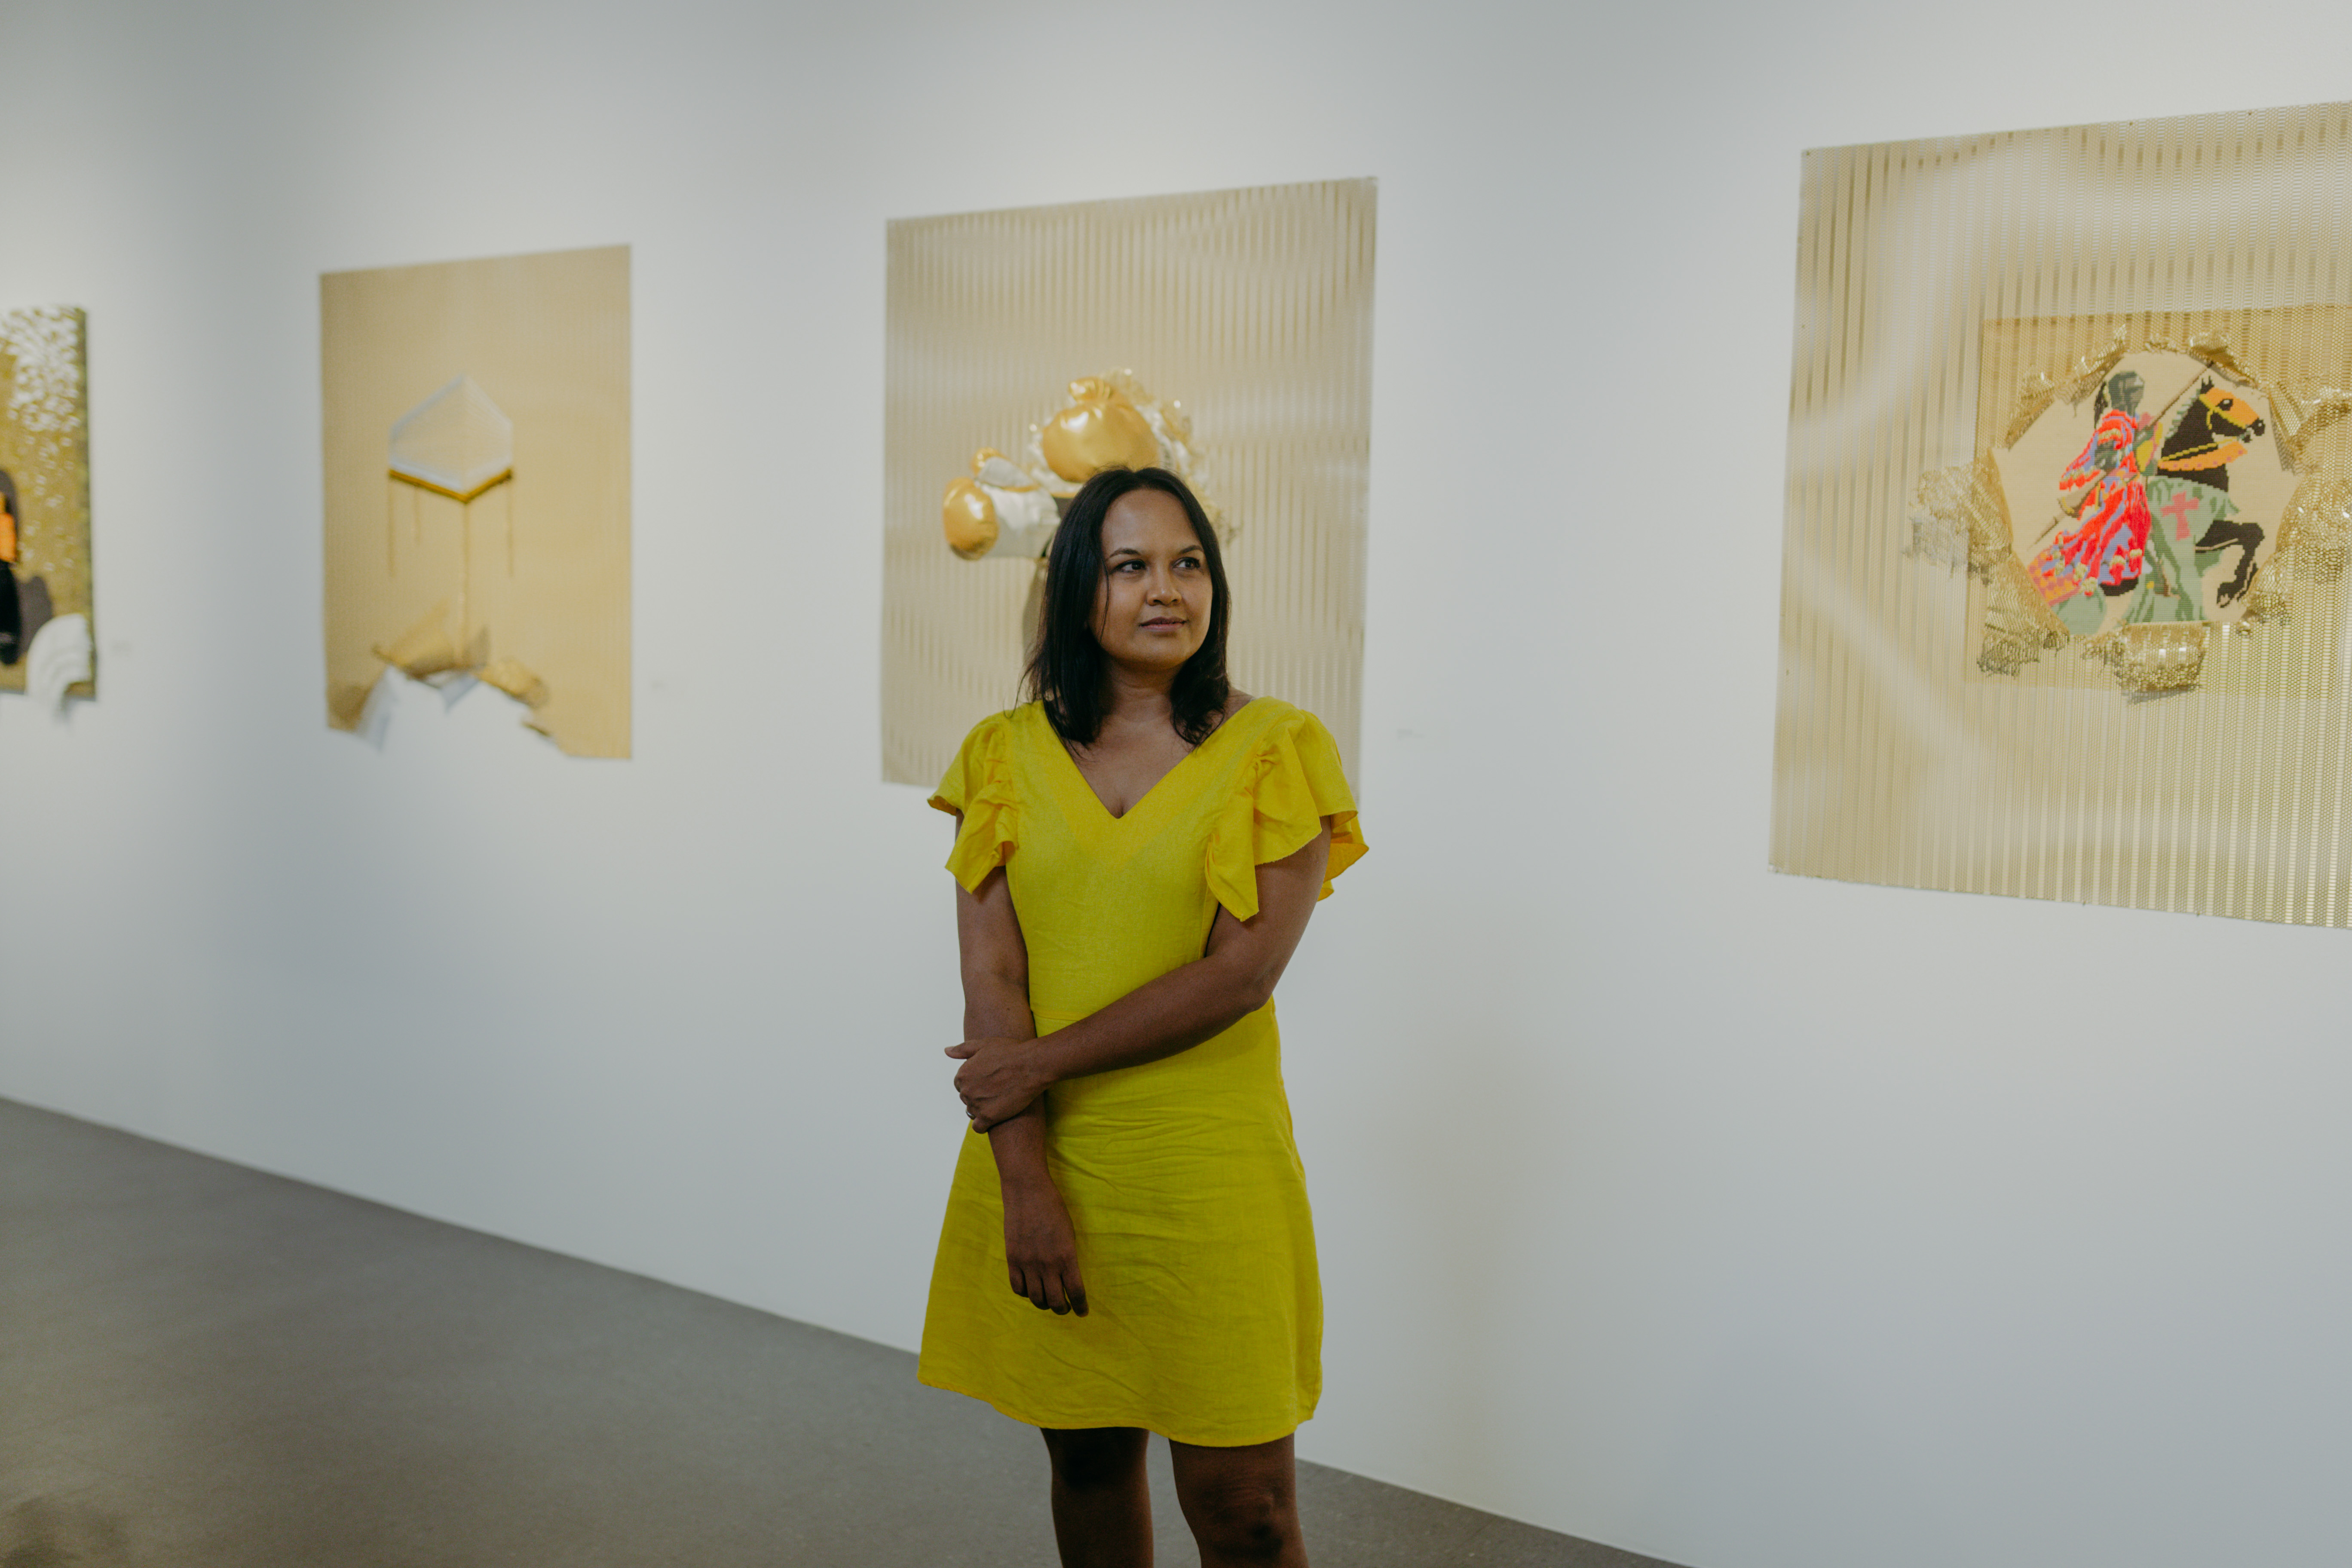 Sucitra stands in front of artworks wearing a bright yellow dress. ﻿